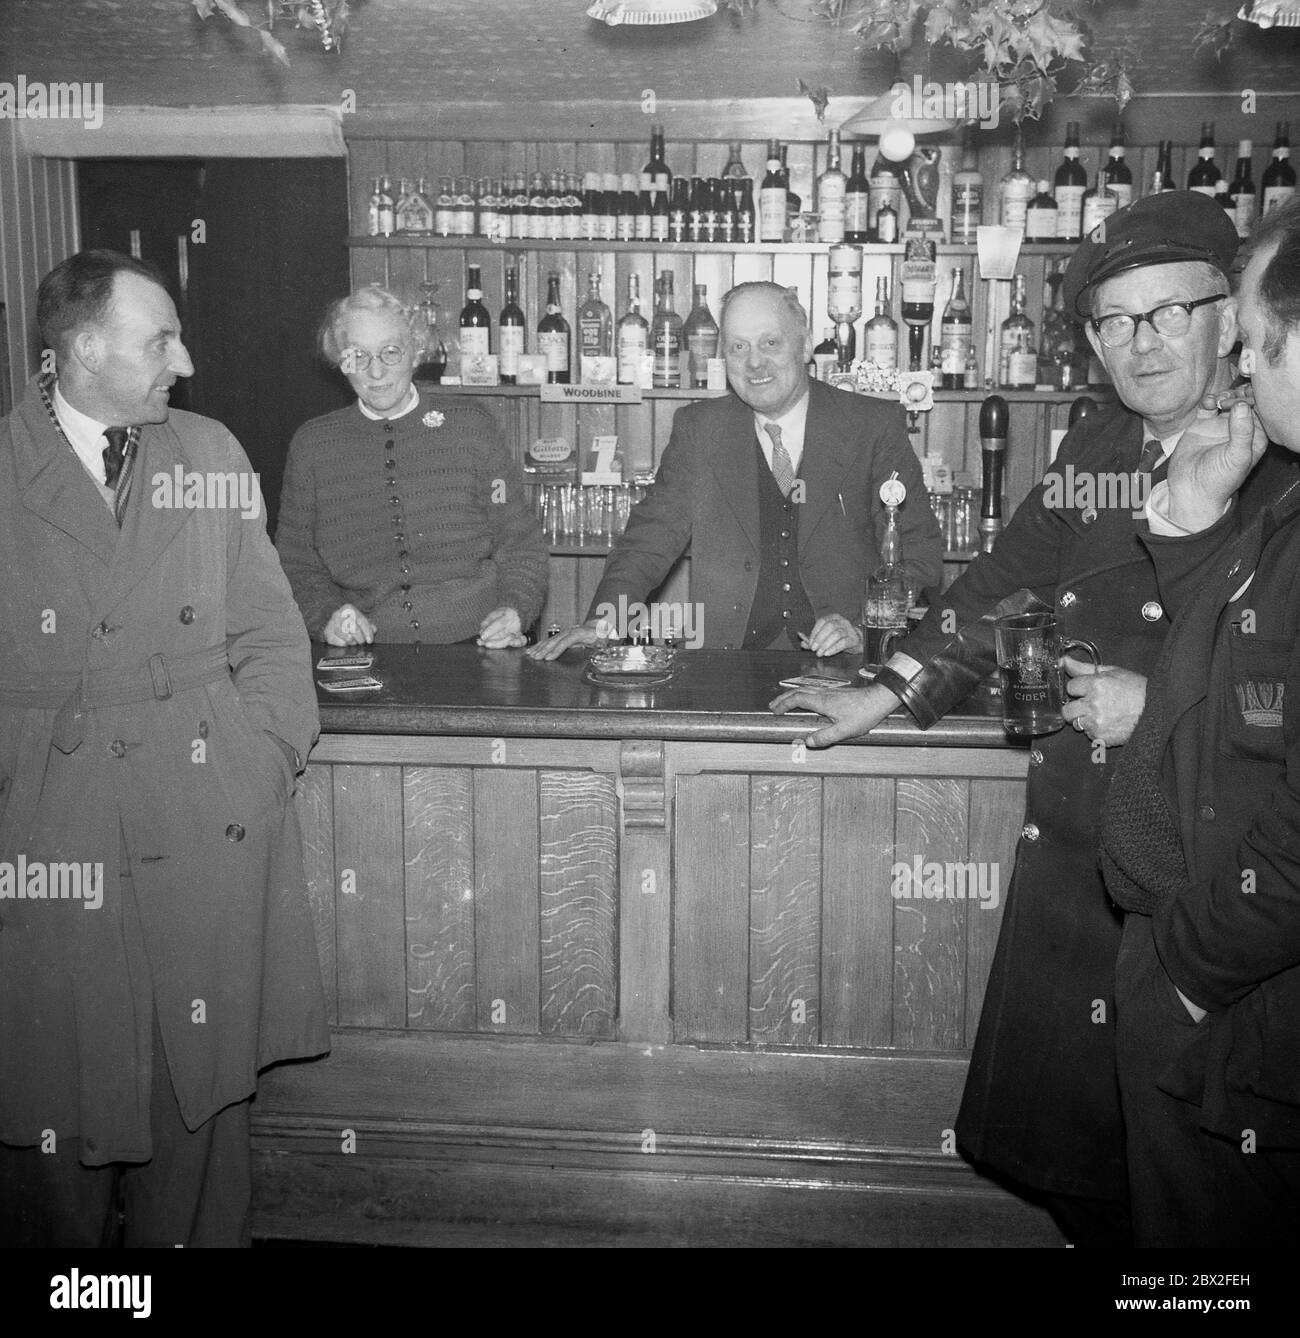 1960, in this historical picture, local men are enjoying a pint at the bar a pub with the landlord and his wife standing behind the counter, England, UK. Stock Photo